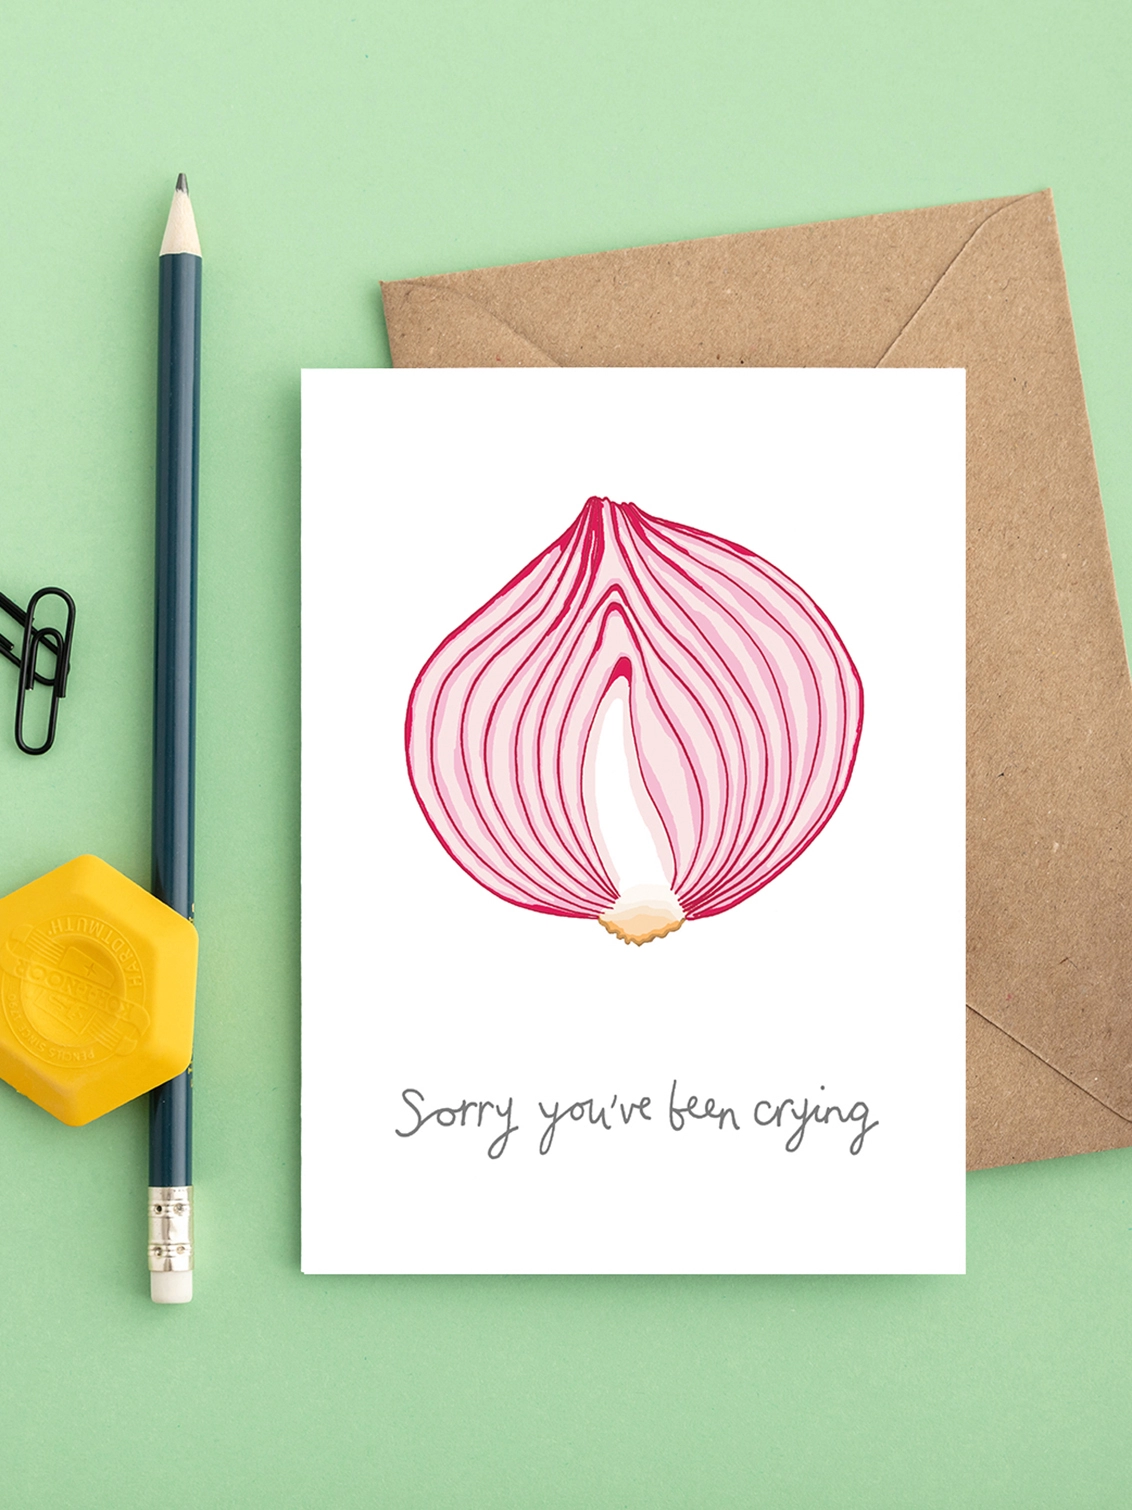 A grief and loss card featuring an onion 